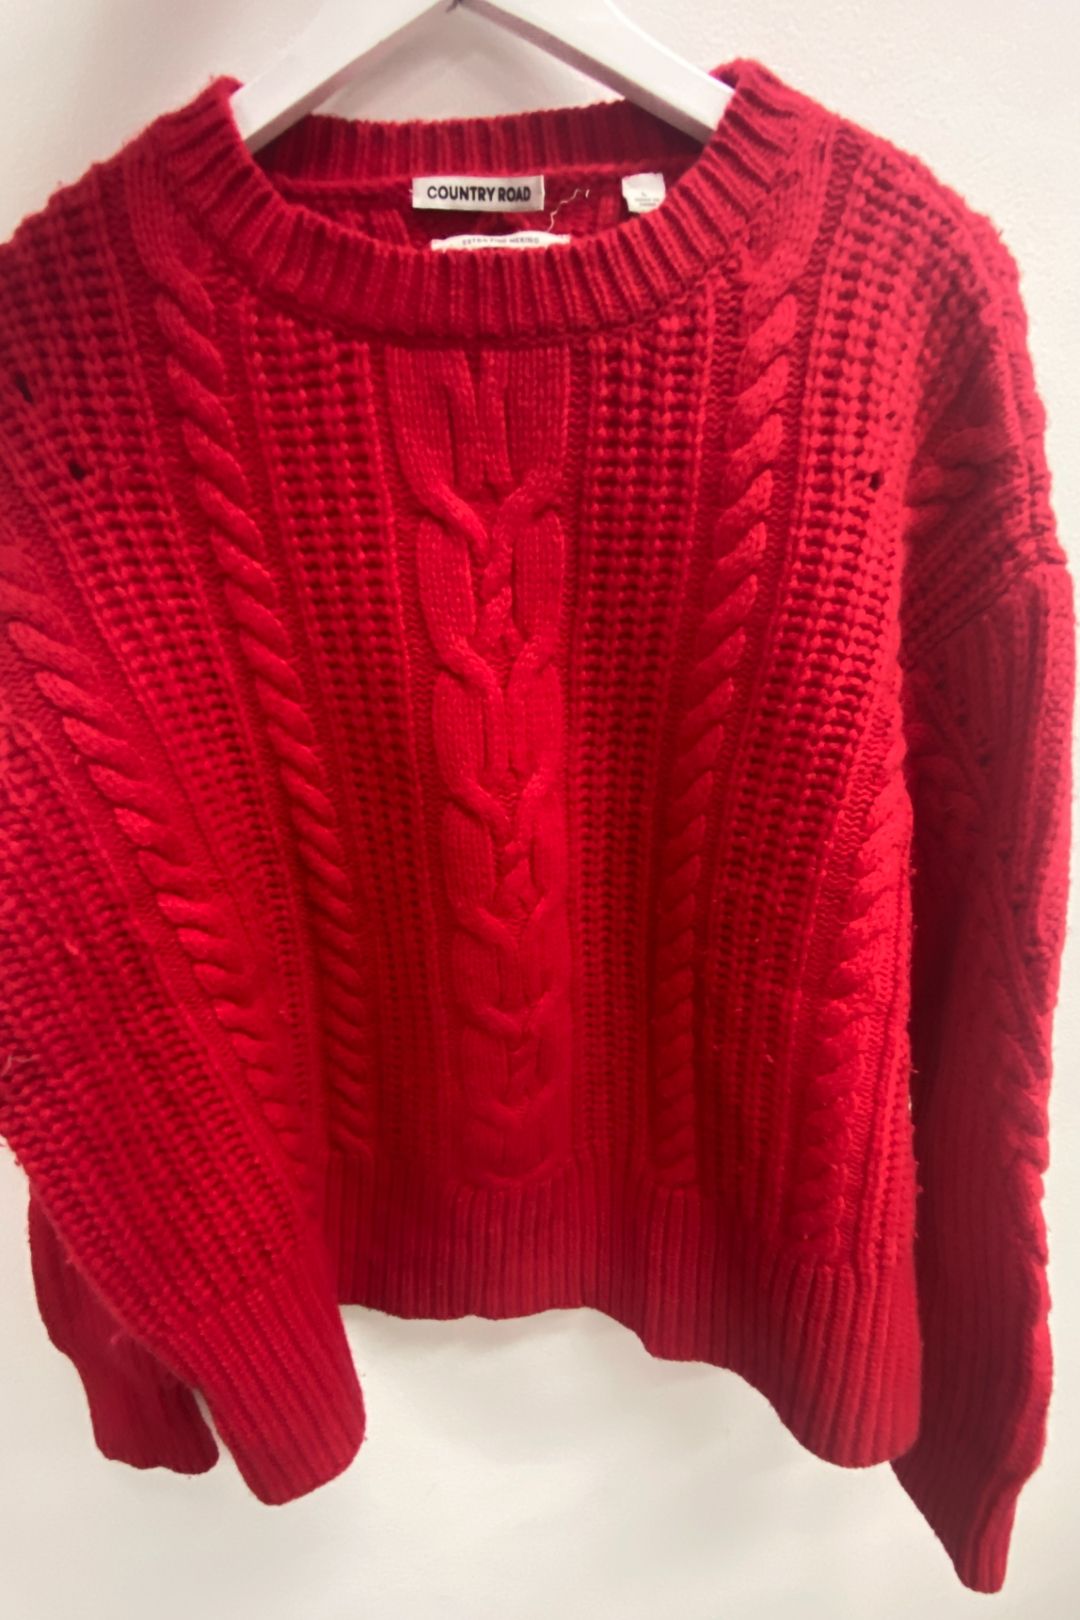 Country Road Red Merino Wool Cable Swing Knit Jumper